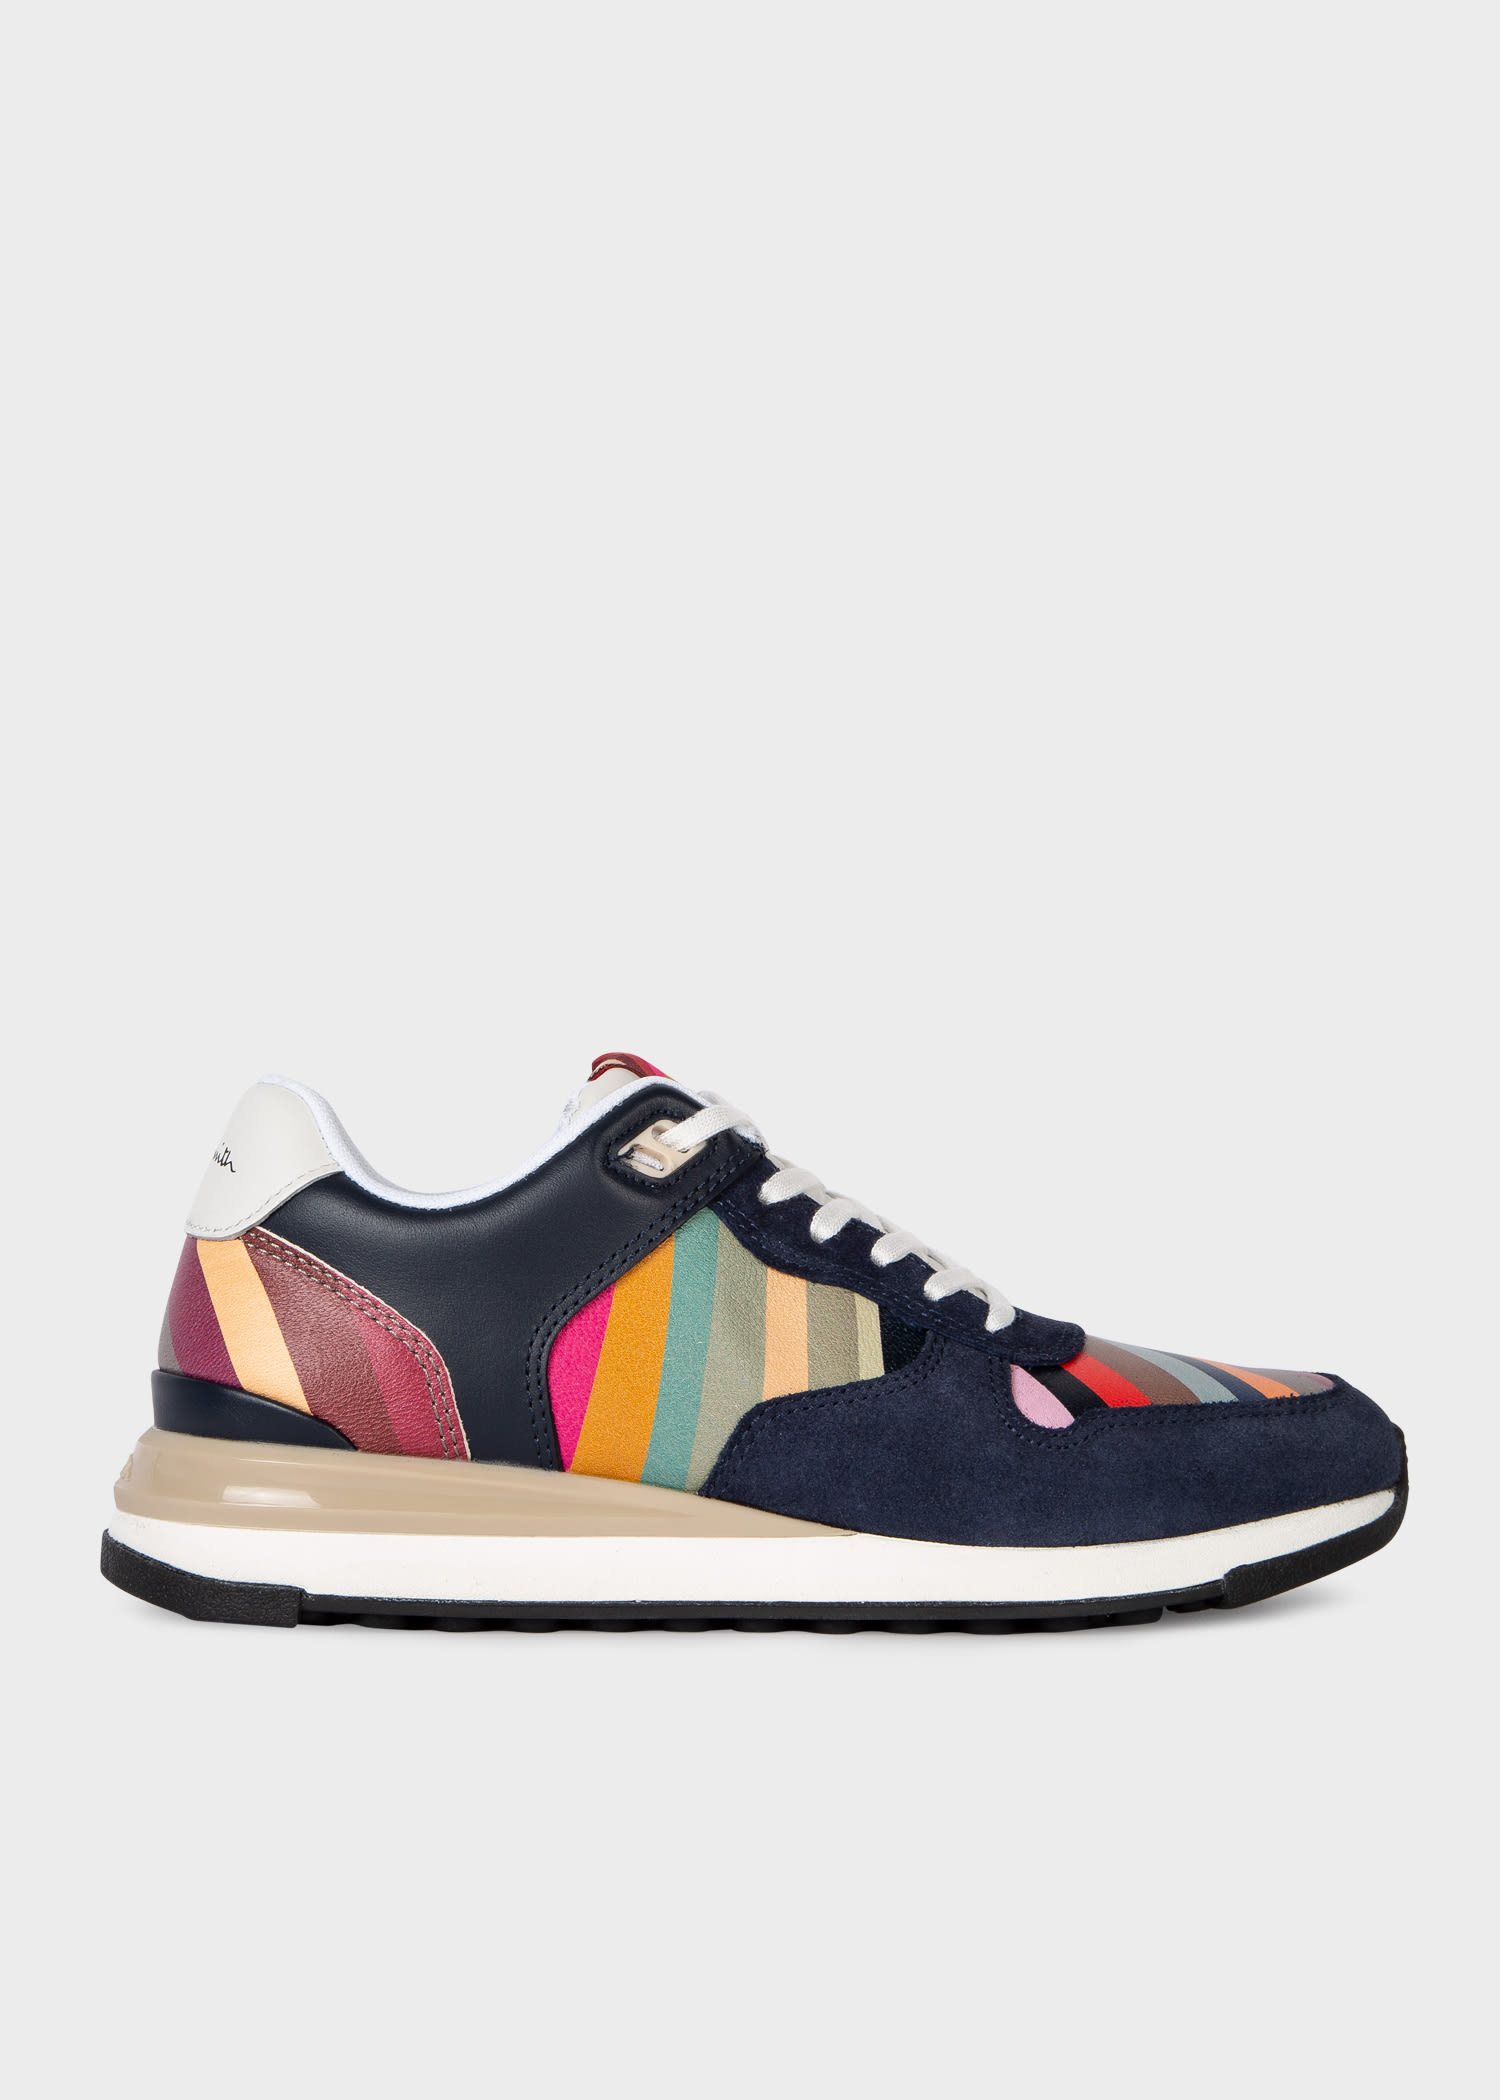 Women's Designer Shoes | Leather & Suede - Paul Smith